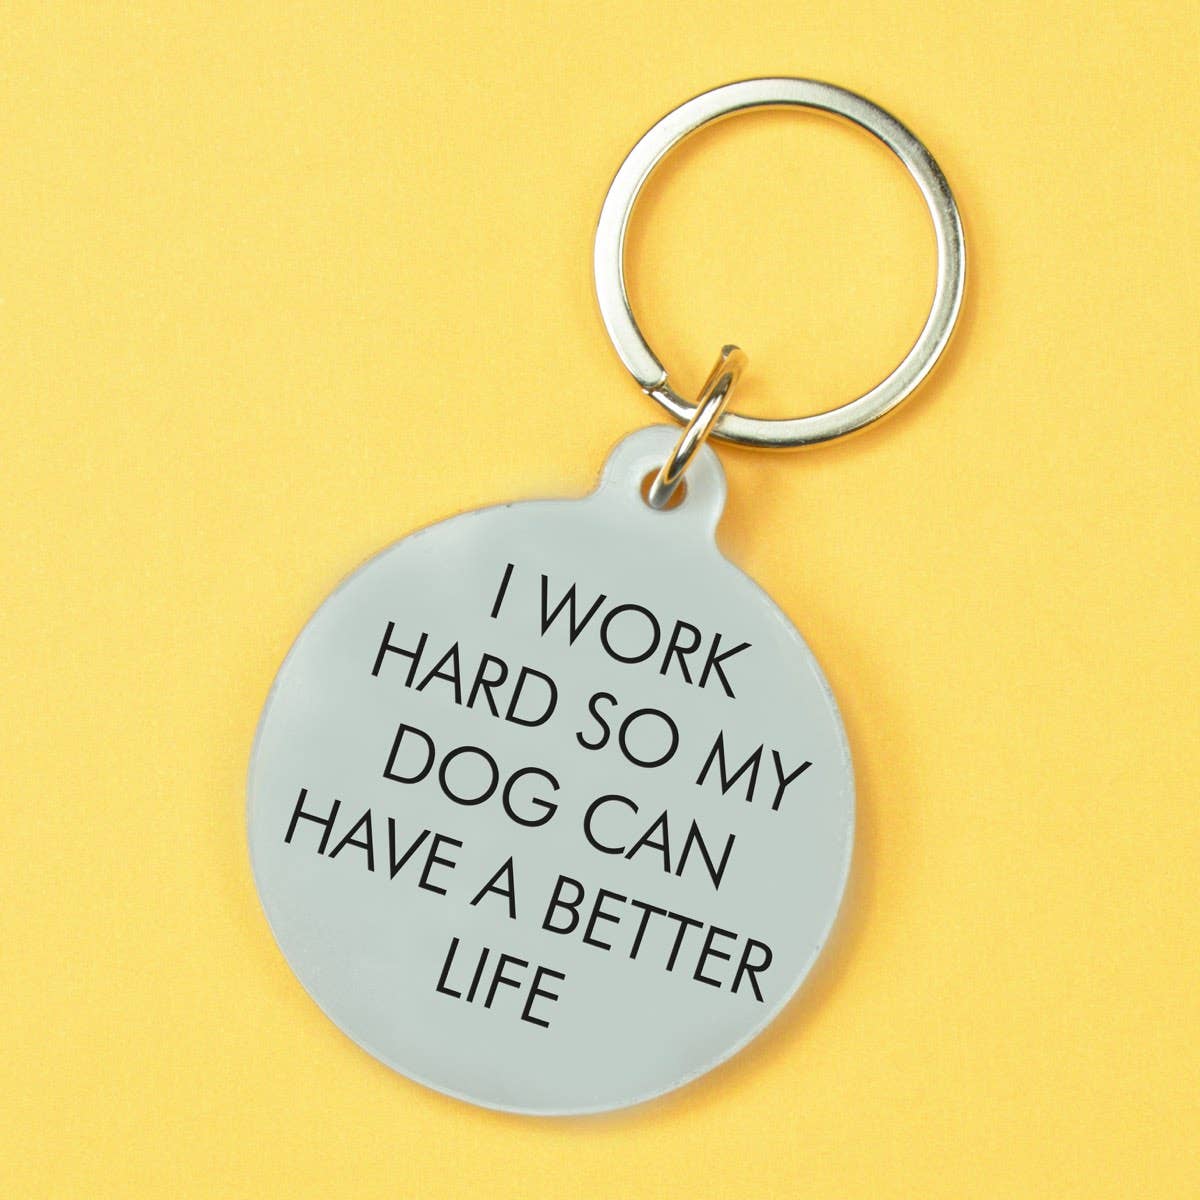 I Work Hard so my Dog Can Have a Better Life Keytag